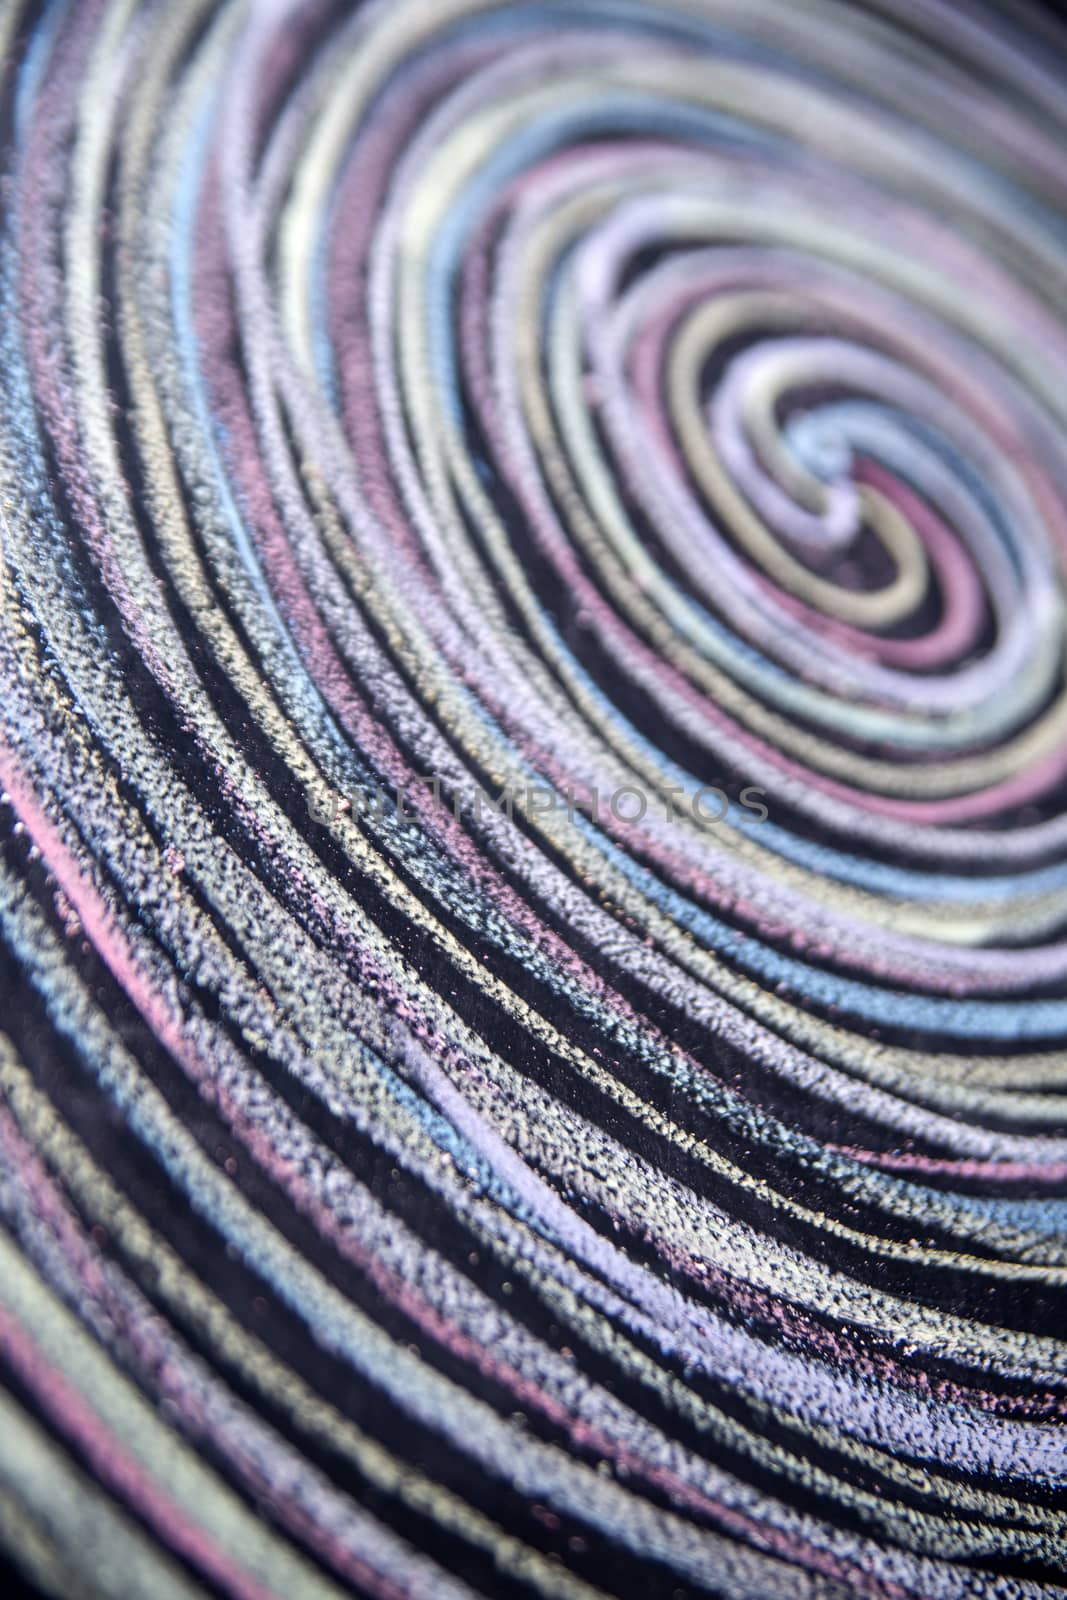 Spirals of different colors drawn with chalk on blackboard